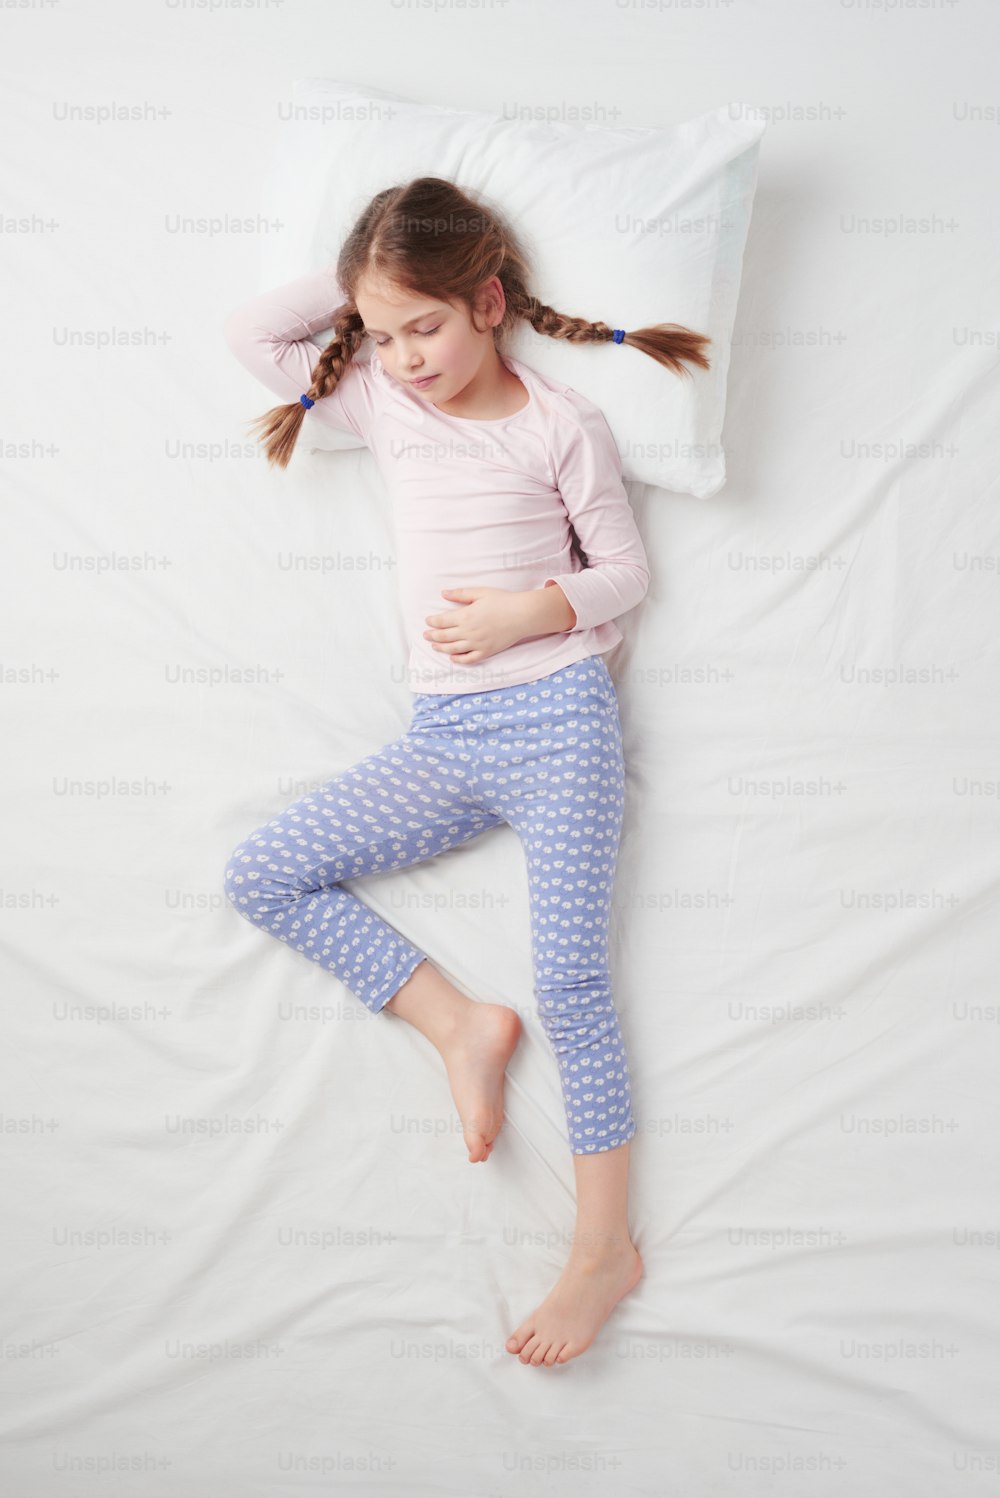 Top view photo of little cute girl with pigtails sleeping on white bed. Concept of sleeping poses